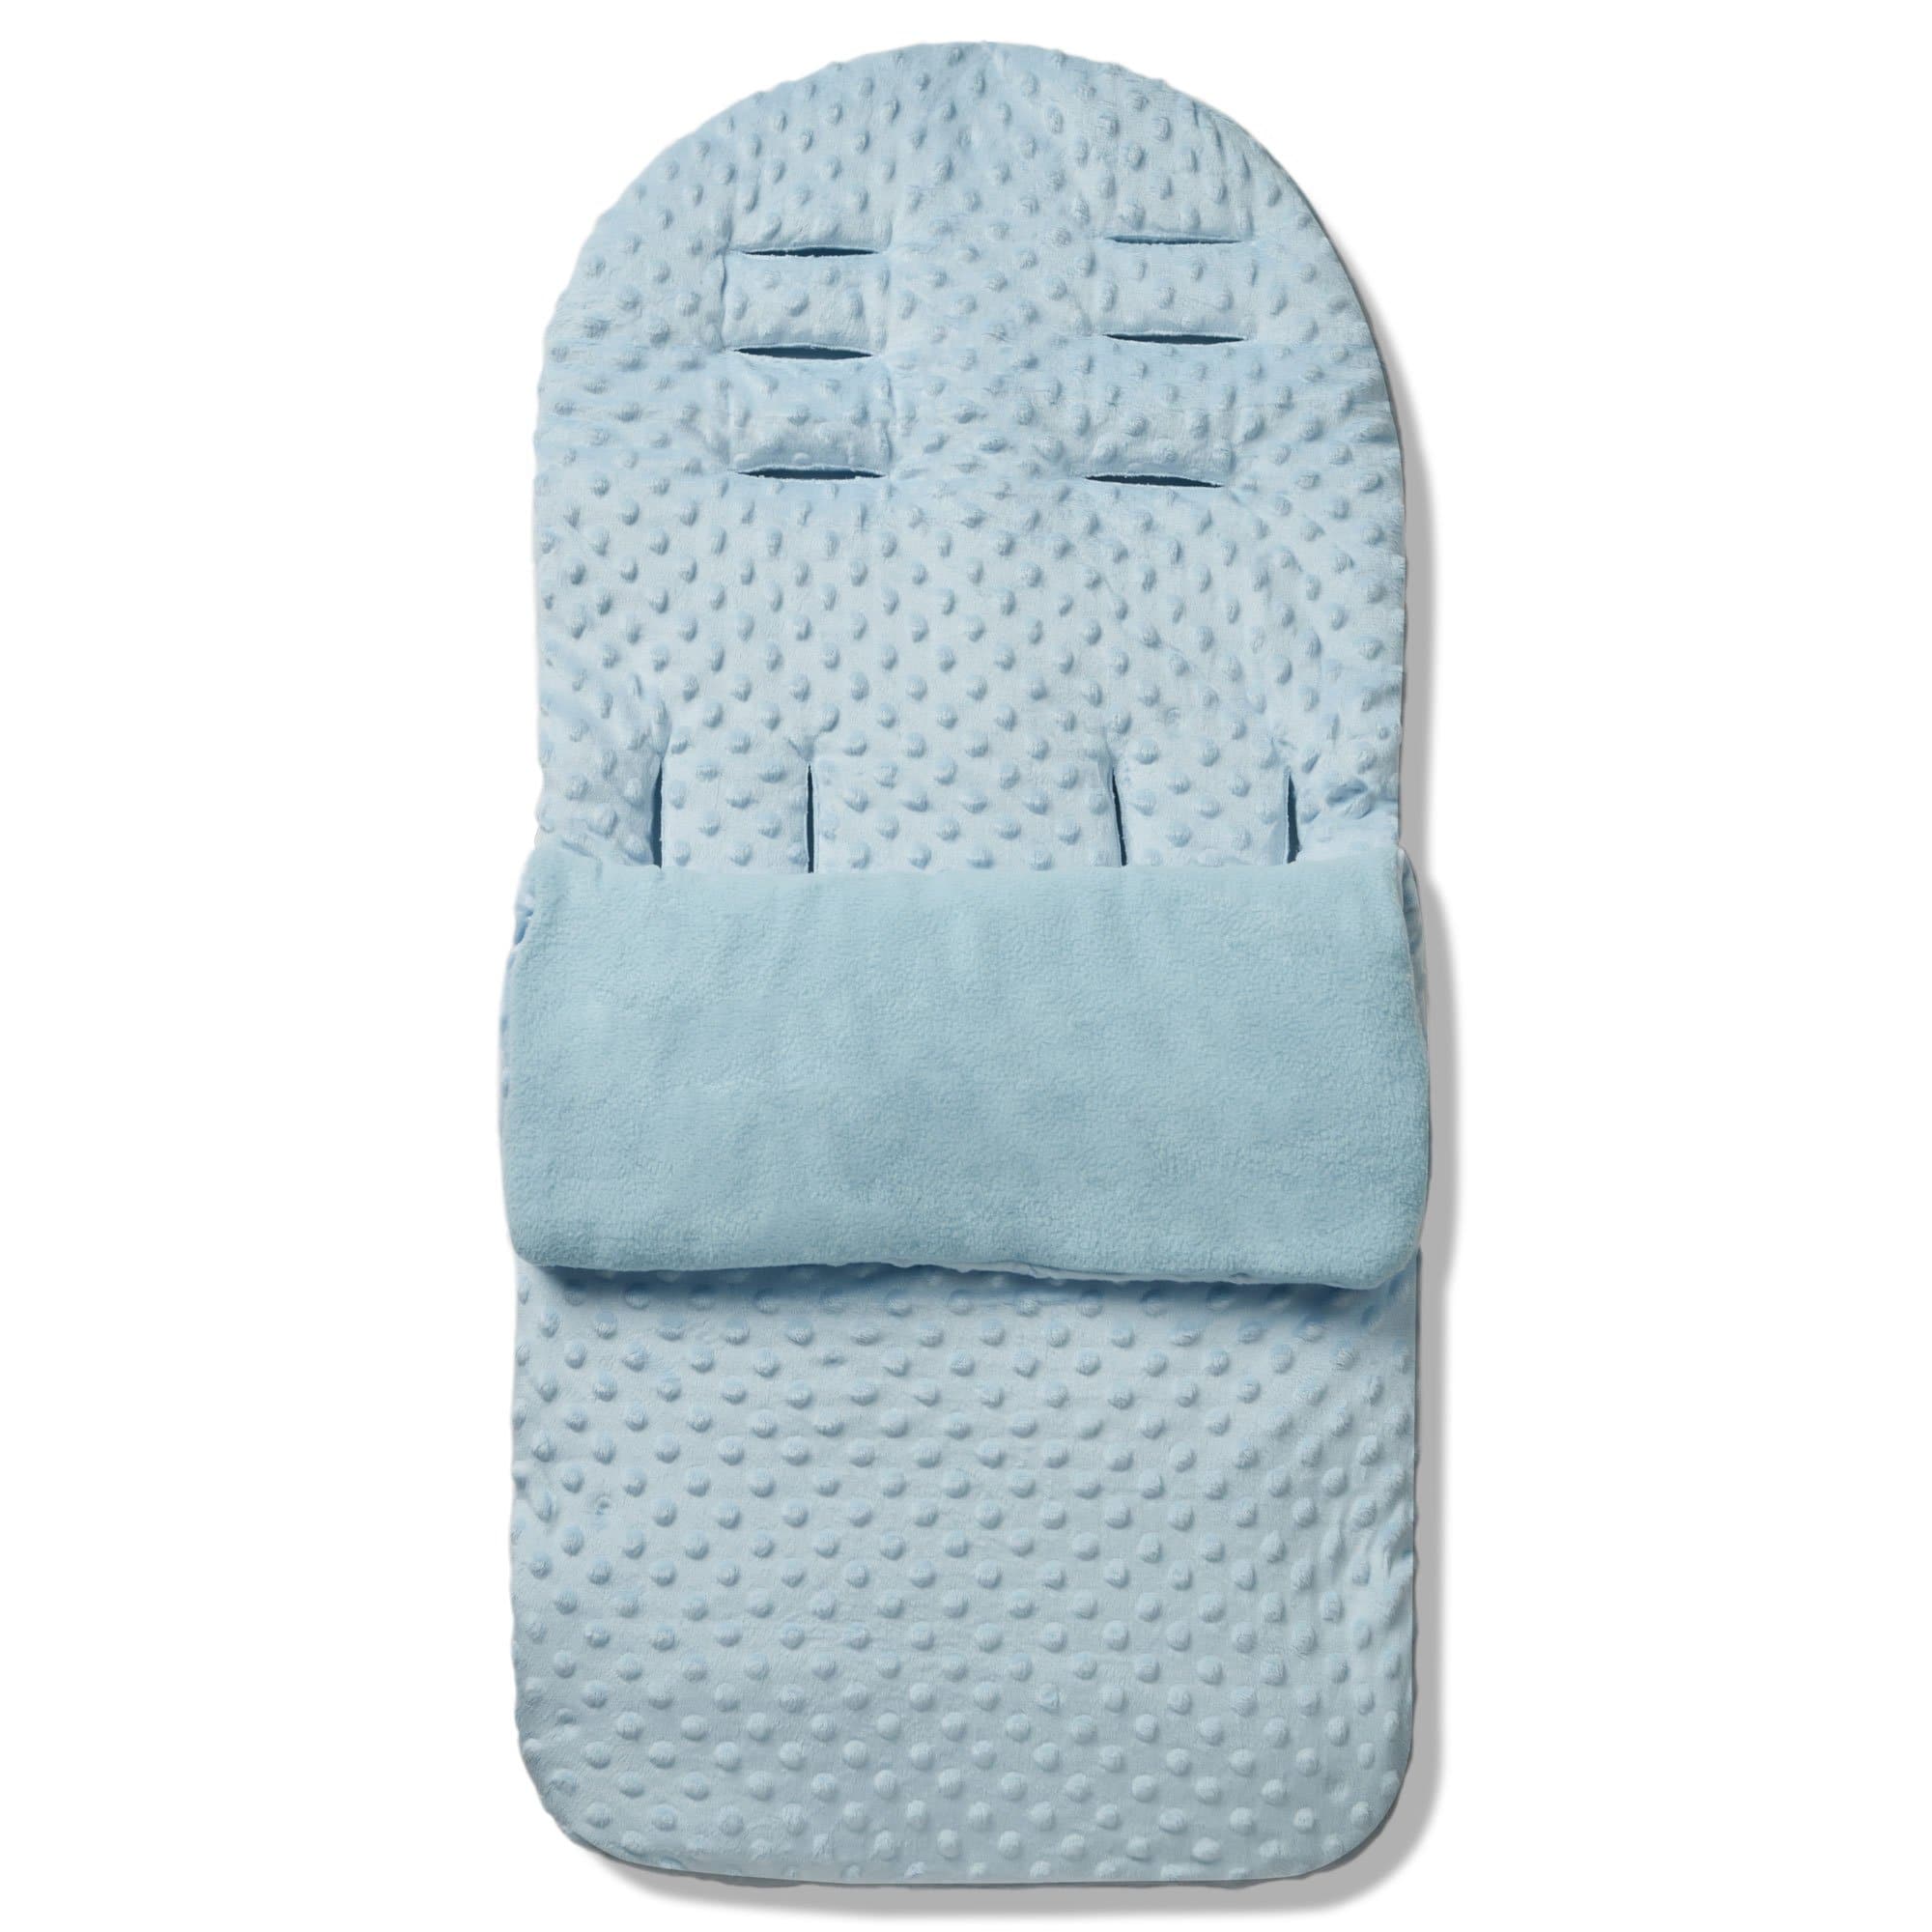 Dimple Footmuff / Cosy Toes Compatible with Mountain Buggy - Blue / Fits All Models | For Your Little One